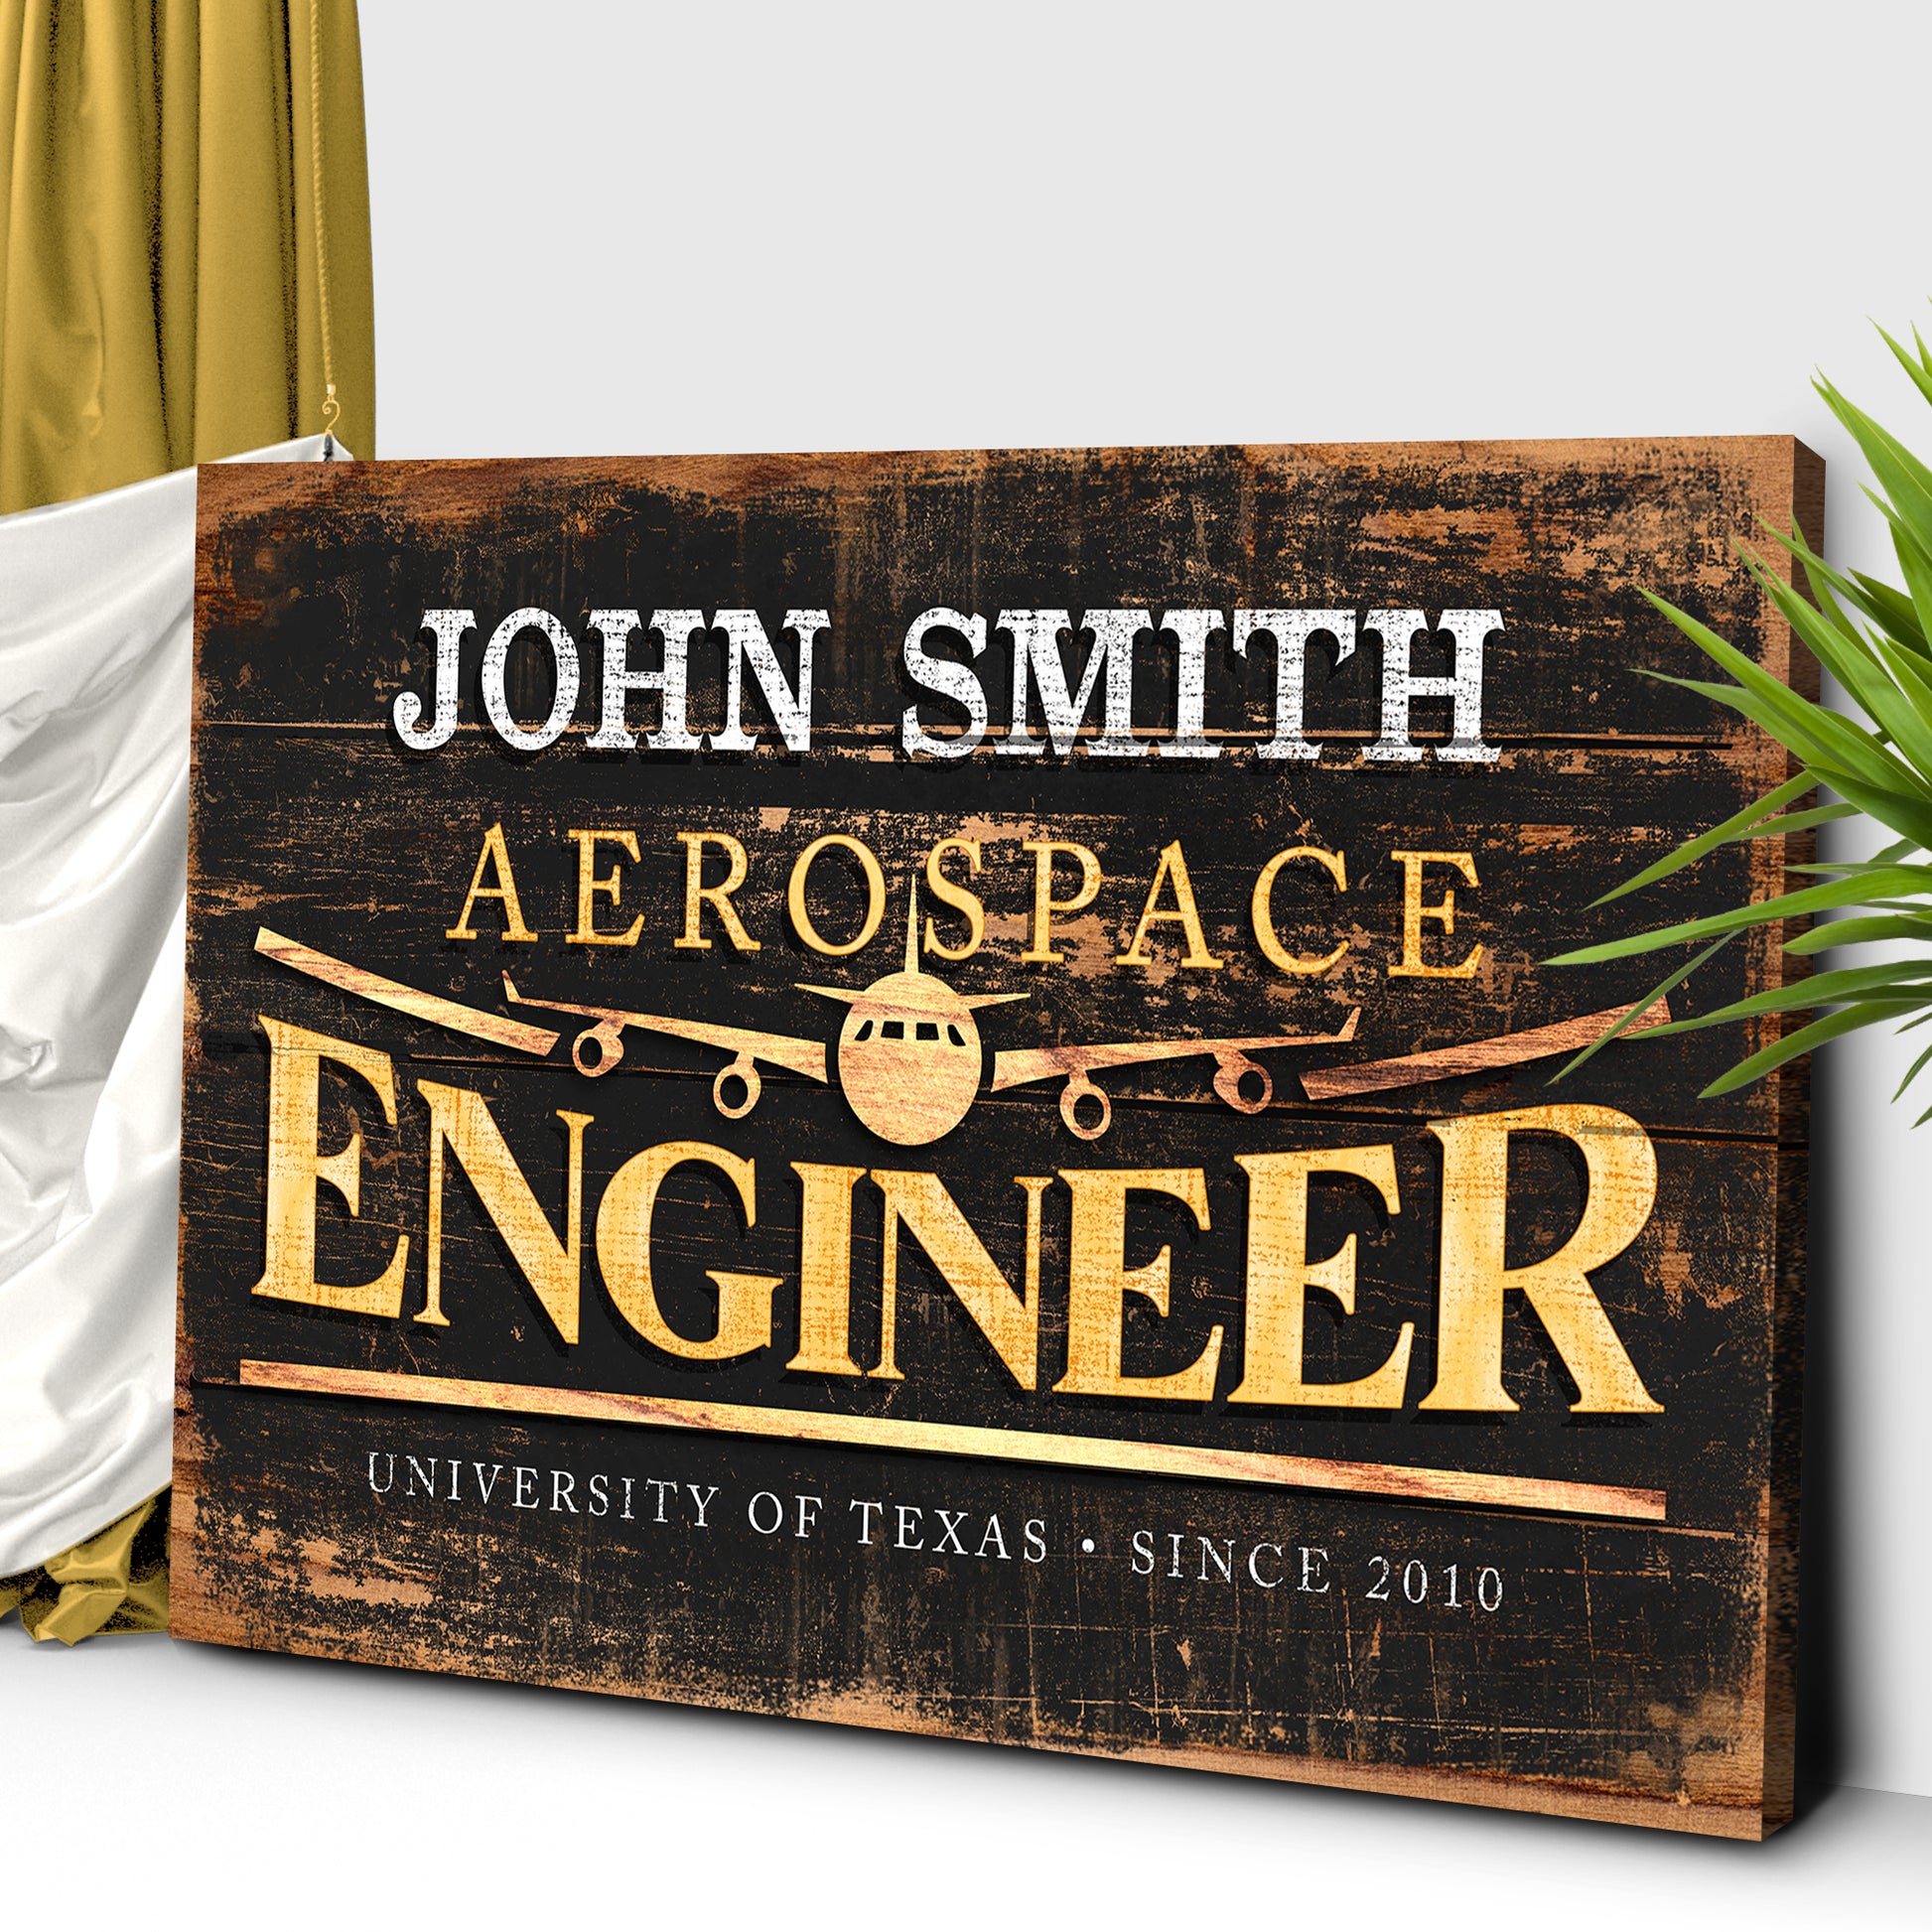 Aerospace Engineer Sign - Image by Tailored Canvases